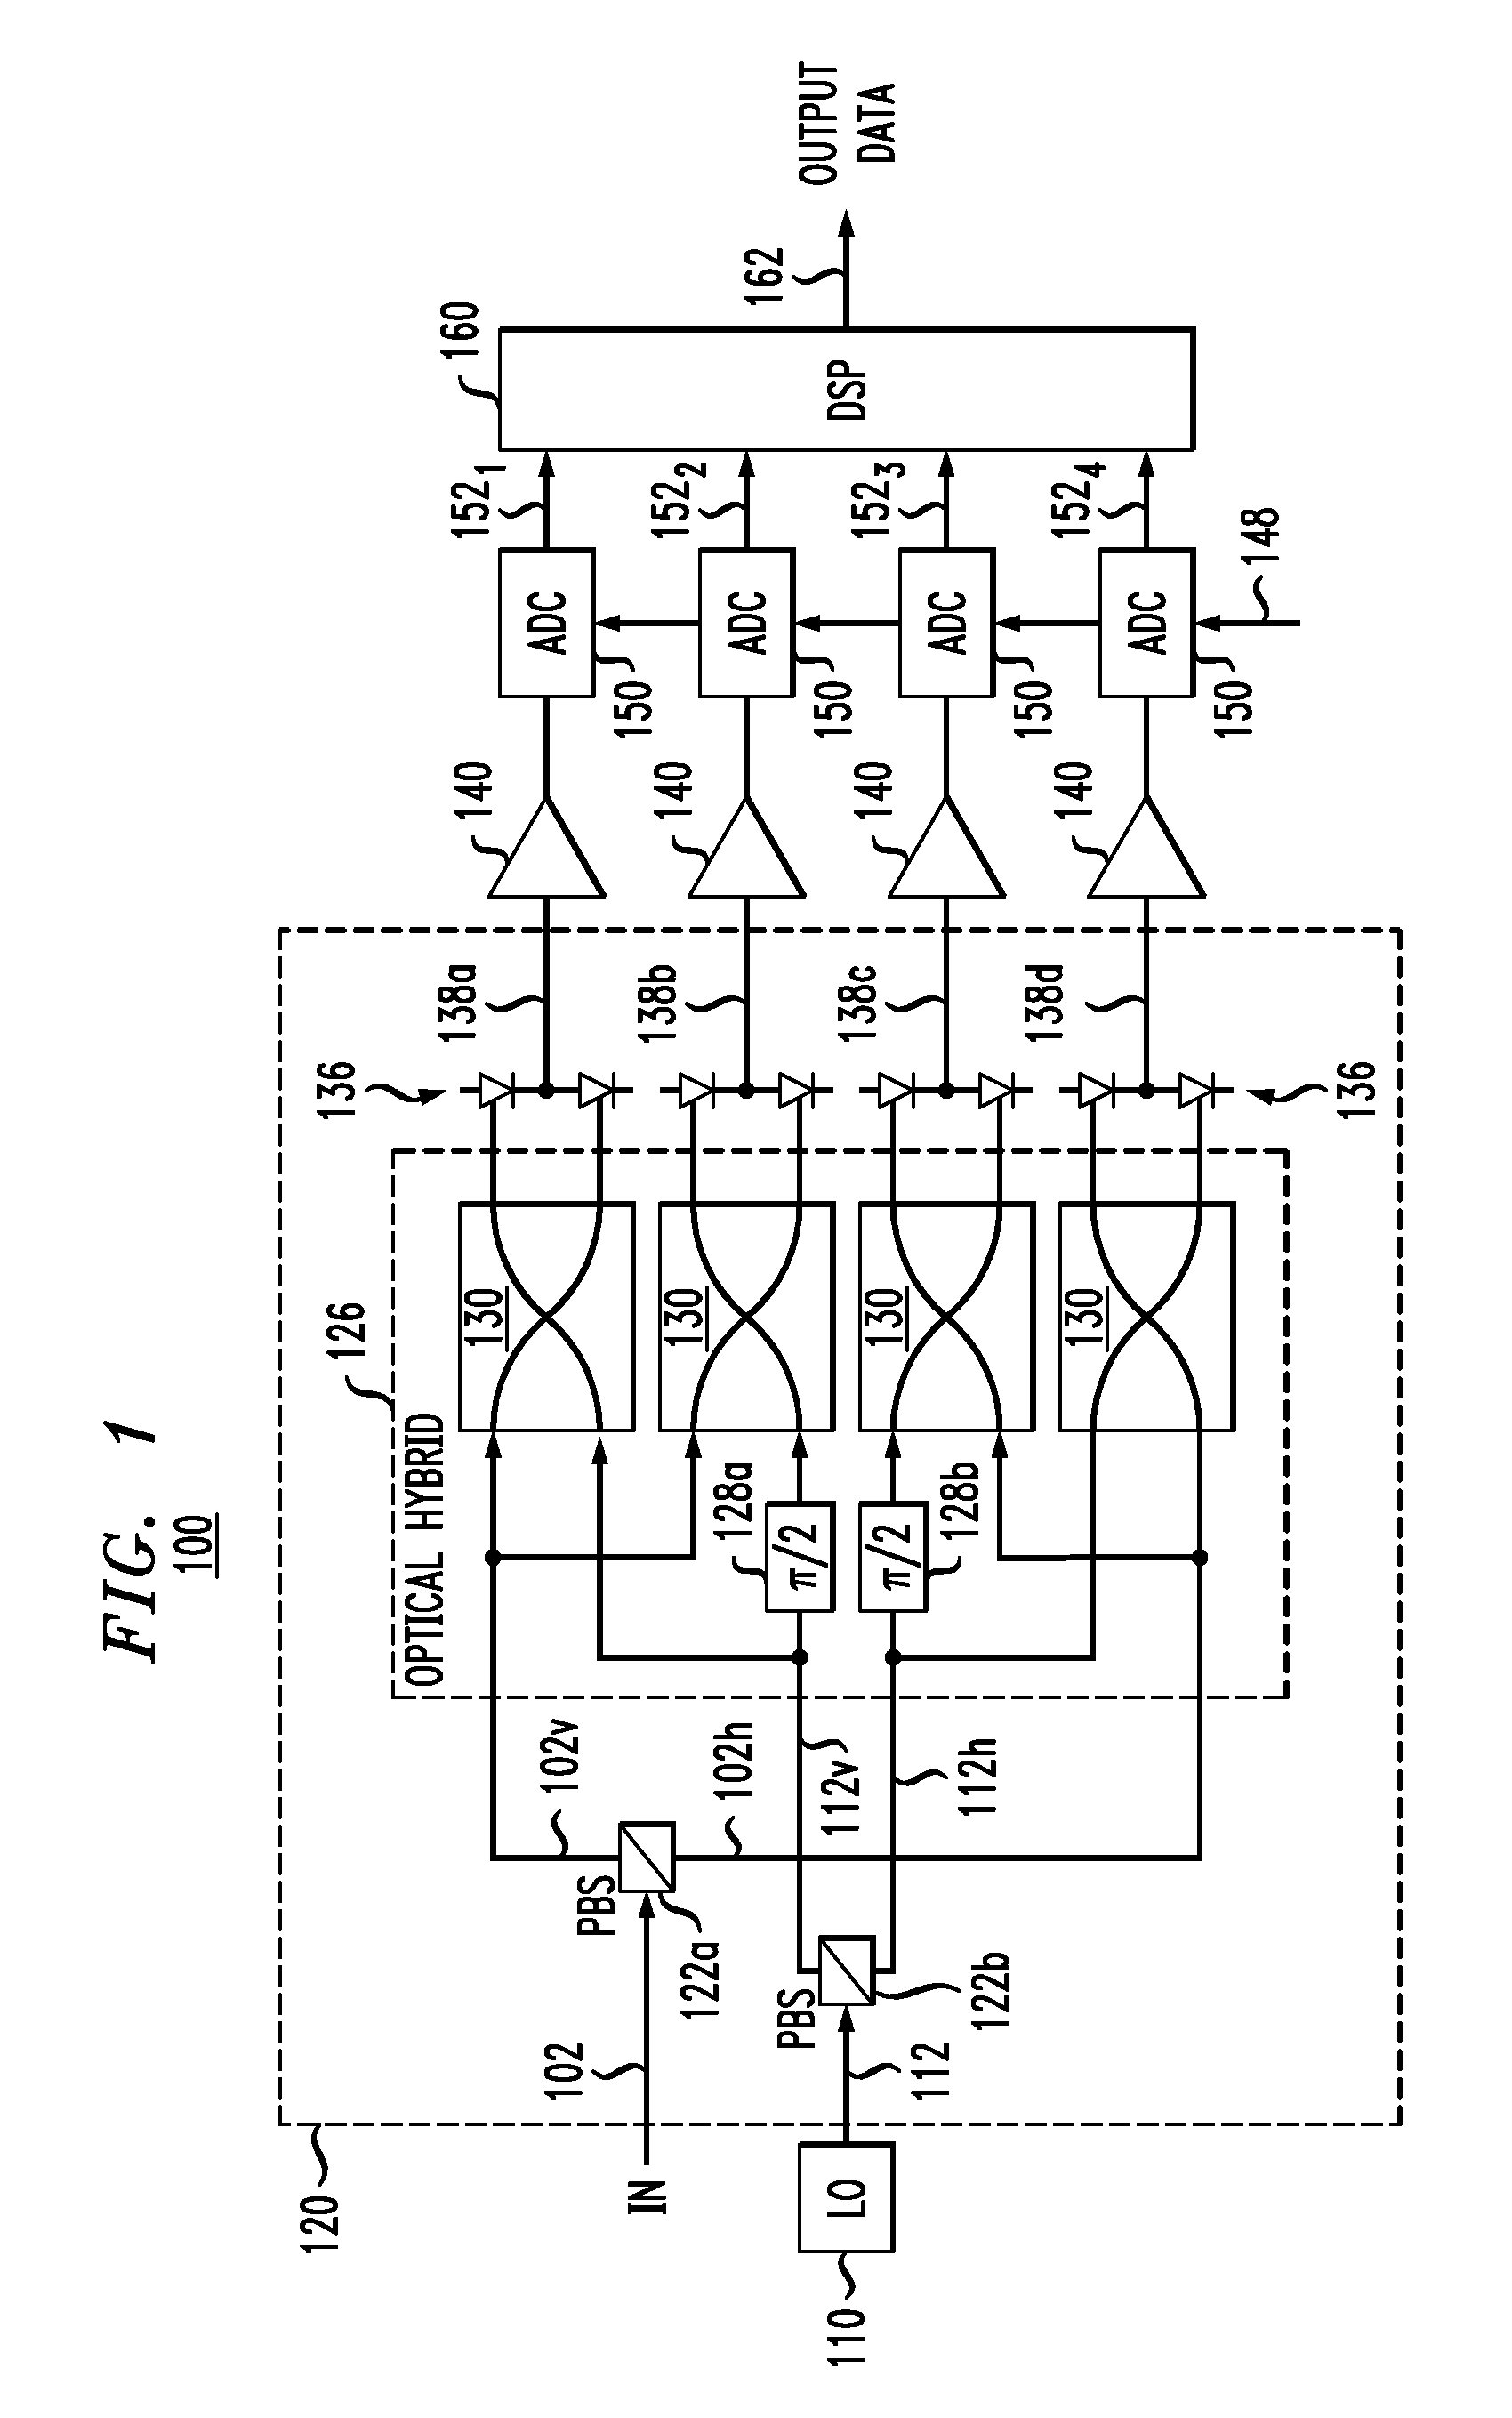 Demultiplexing processing for a receiver